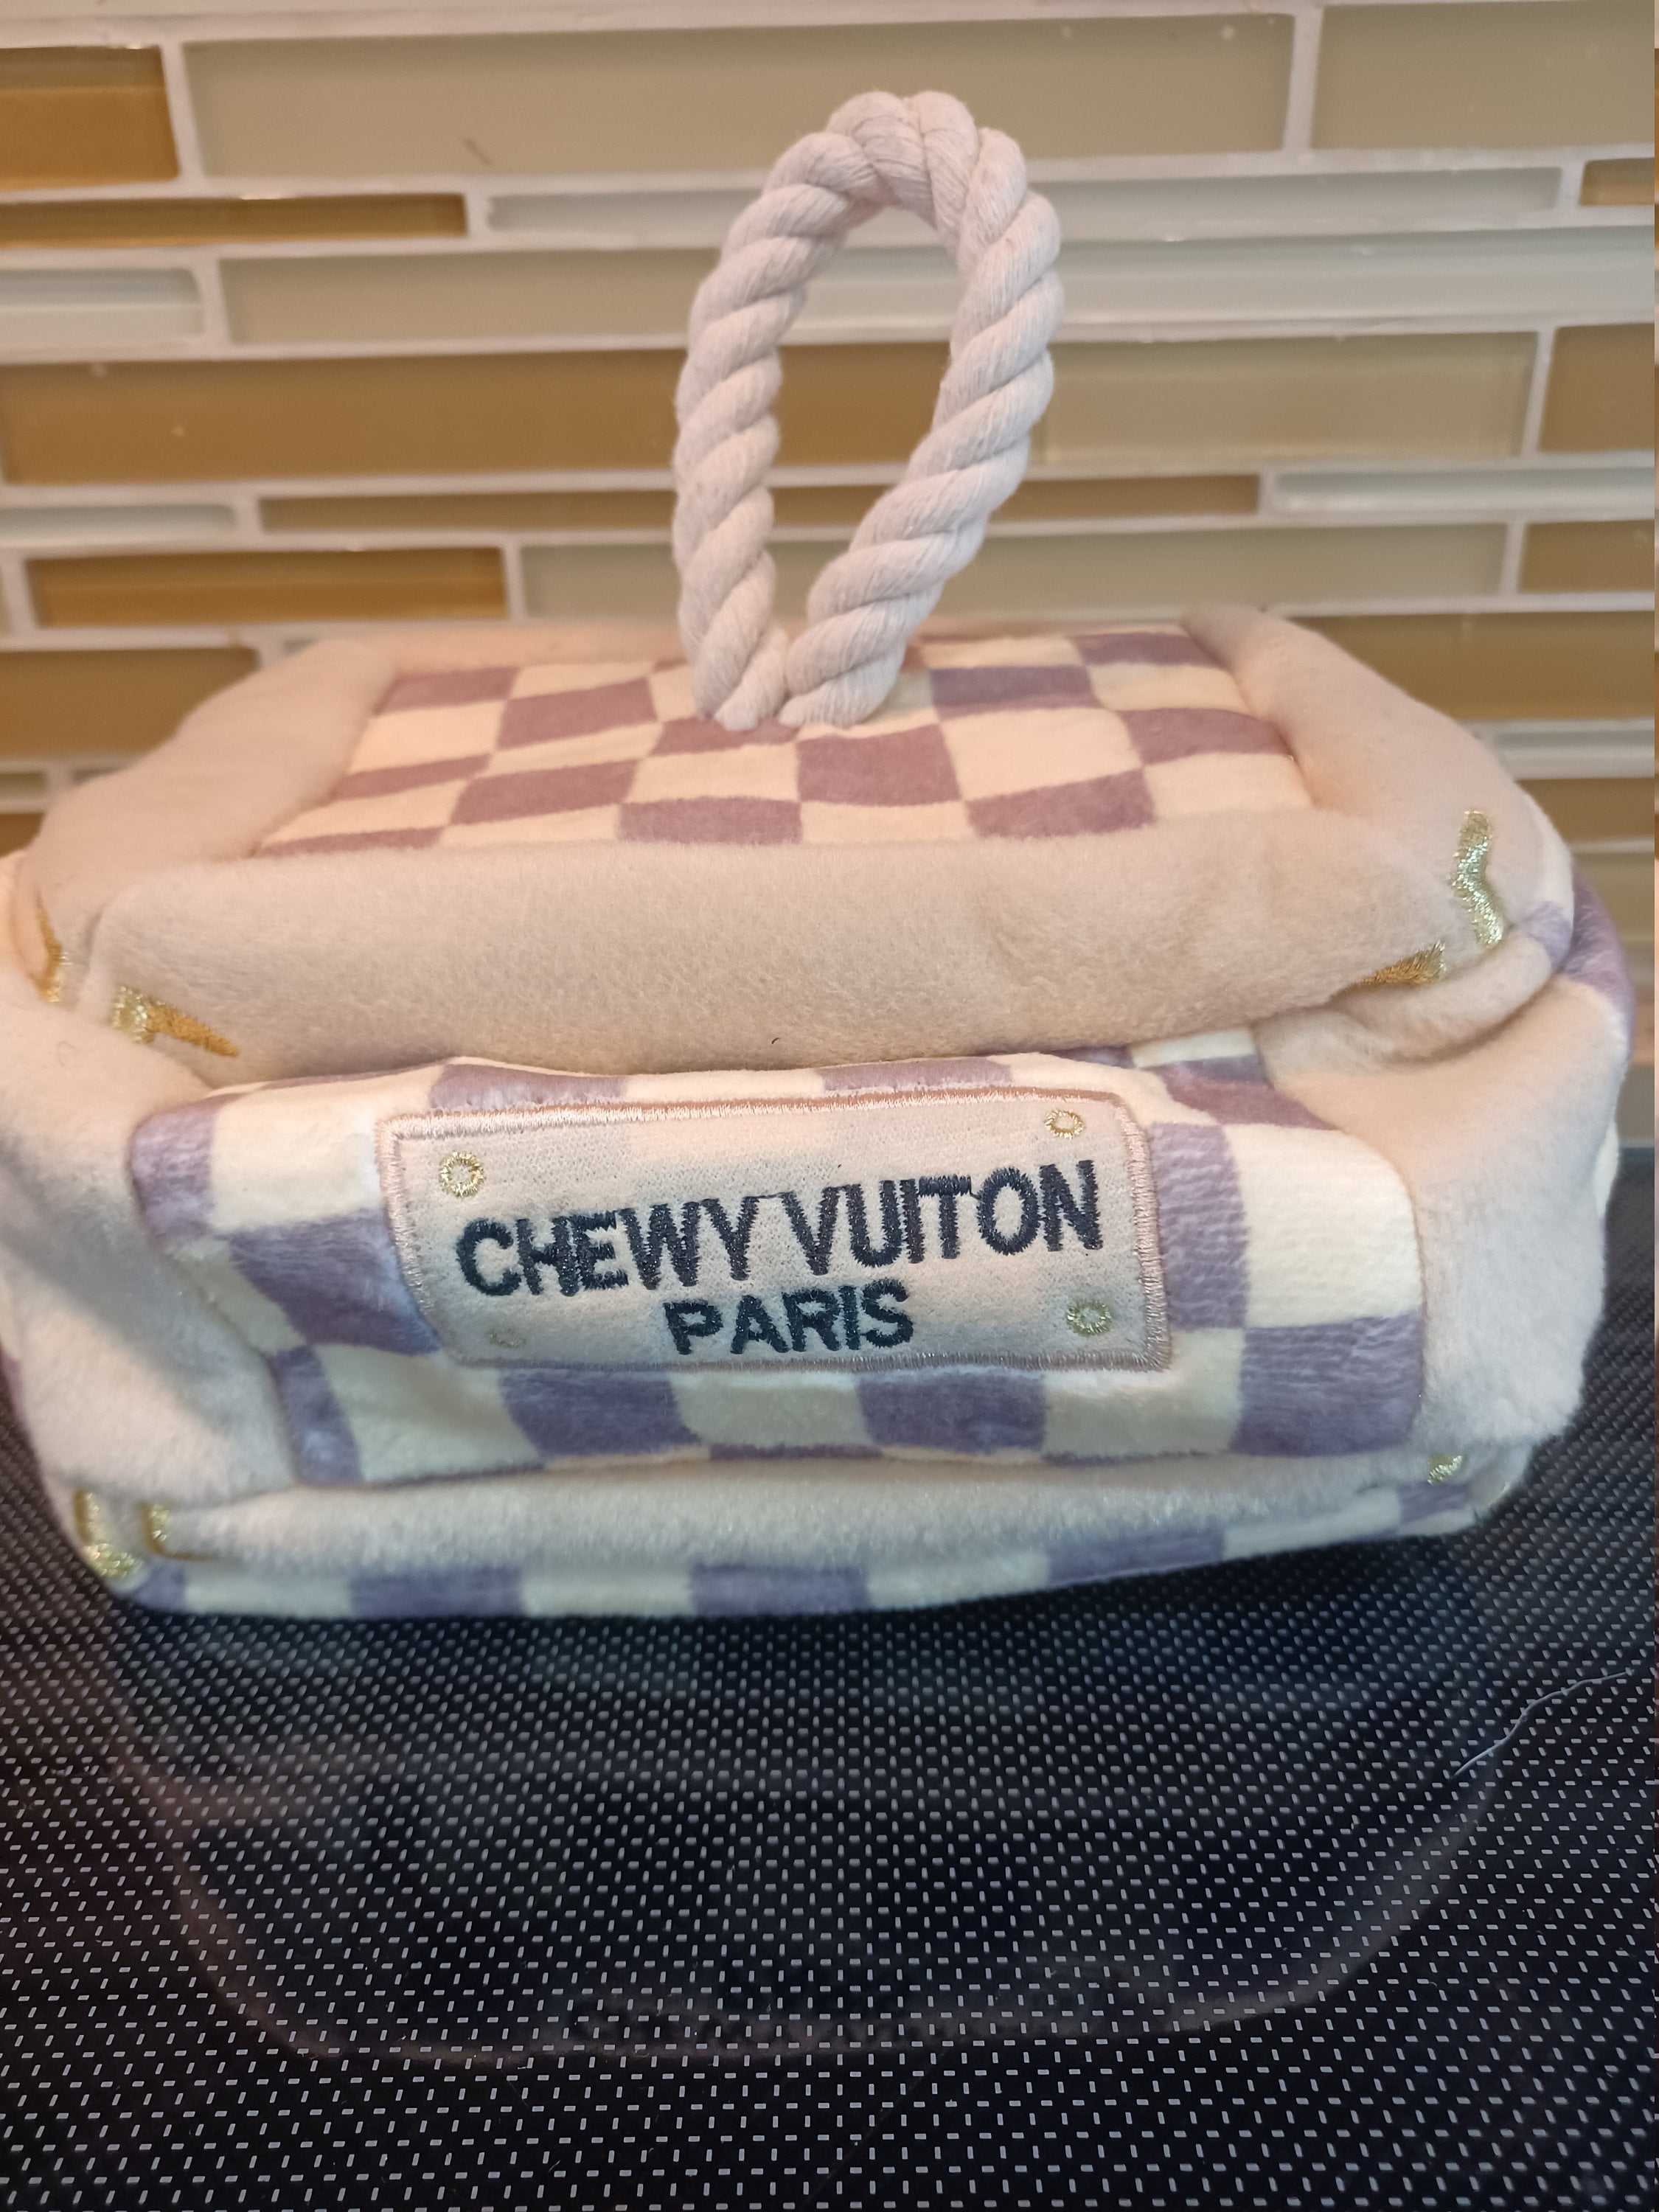 Chewy Vuiton Dog Purse Toy Red Trim